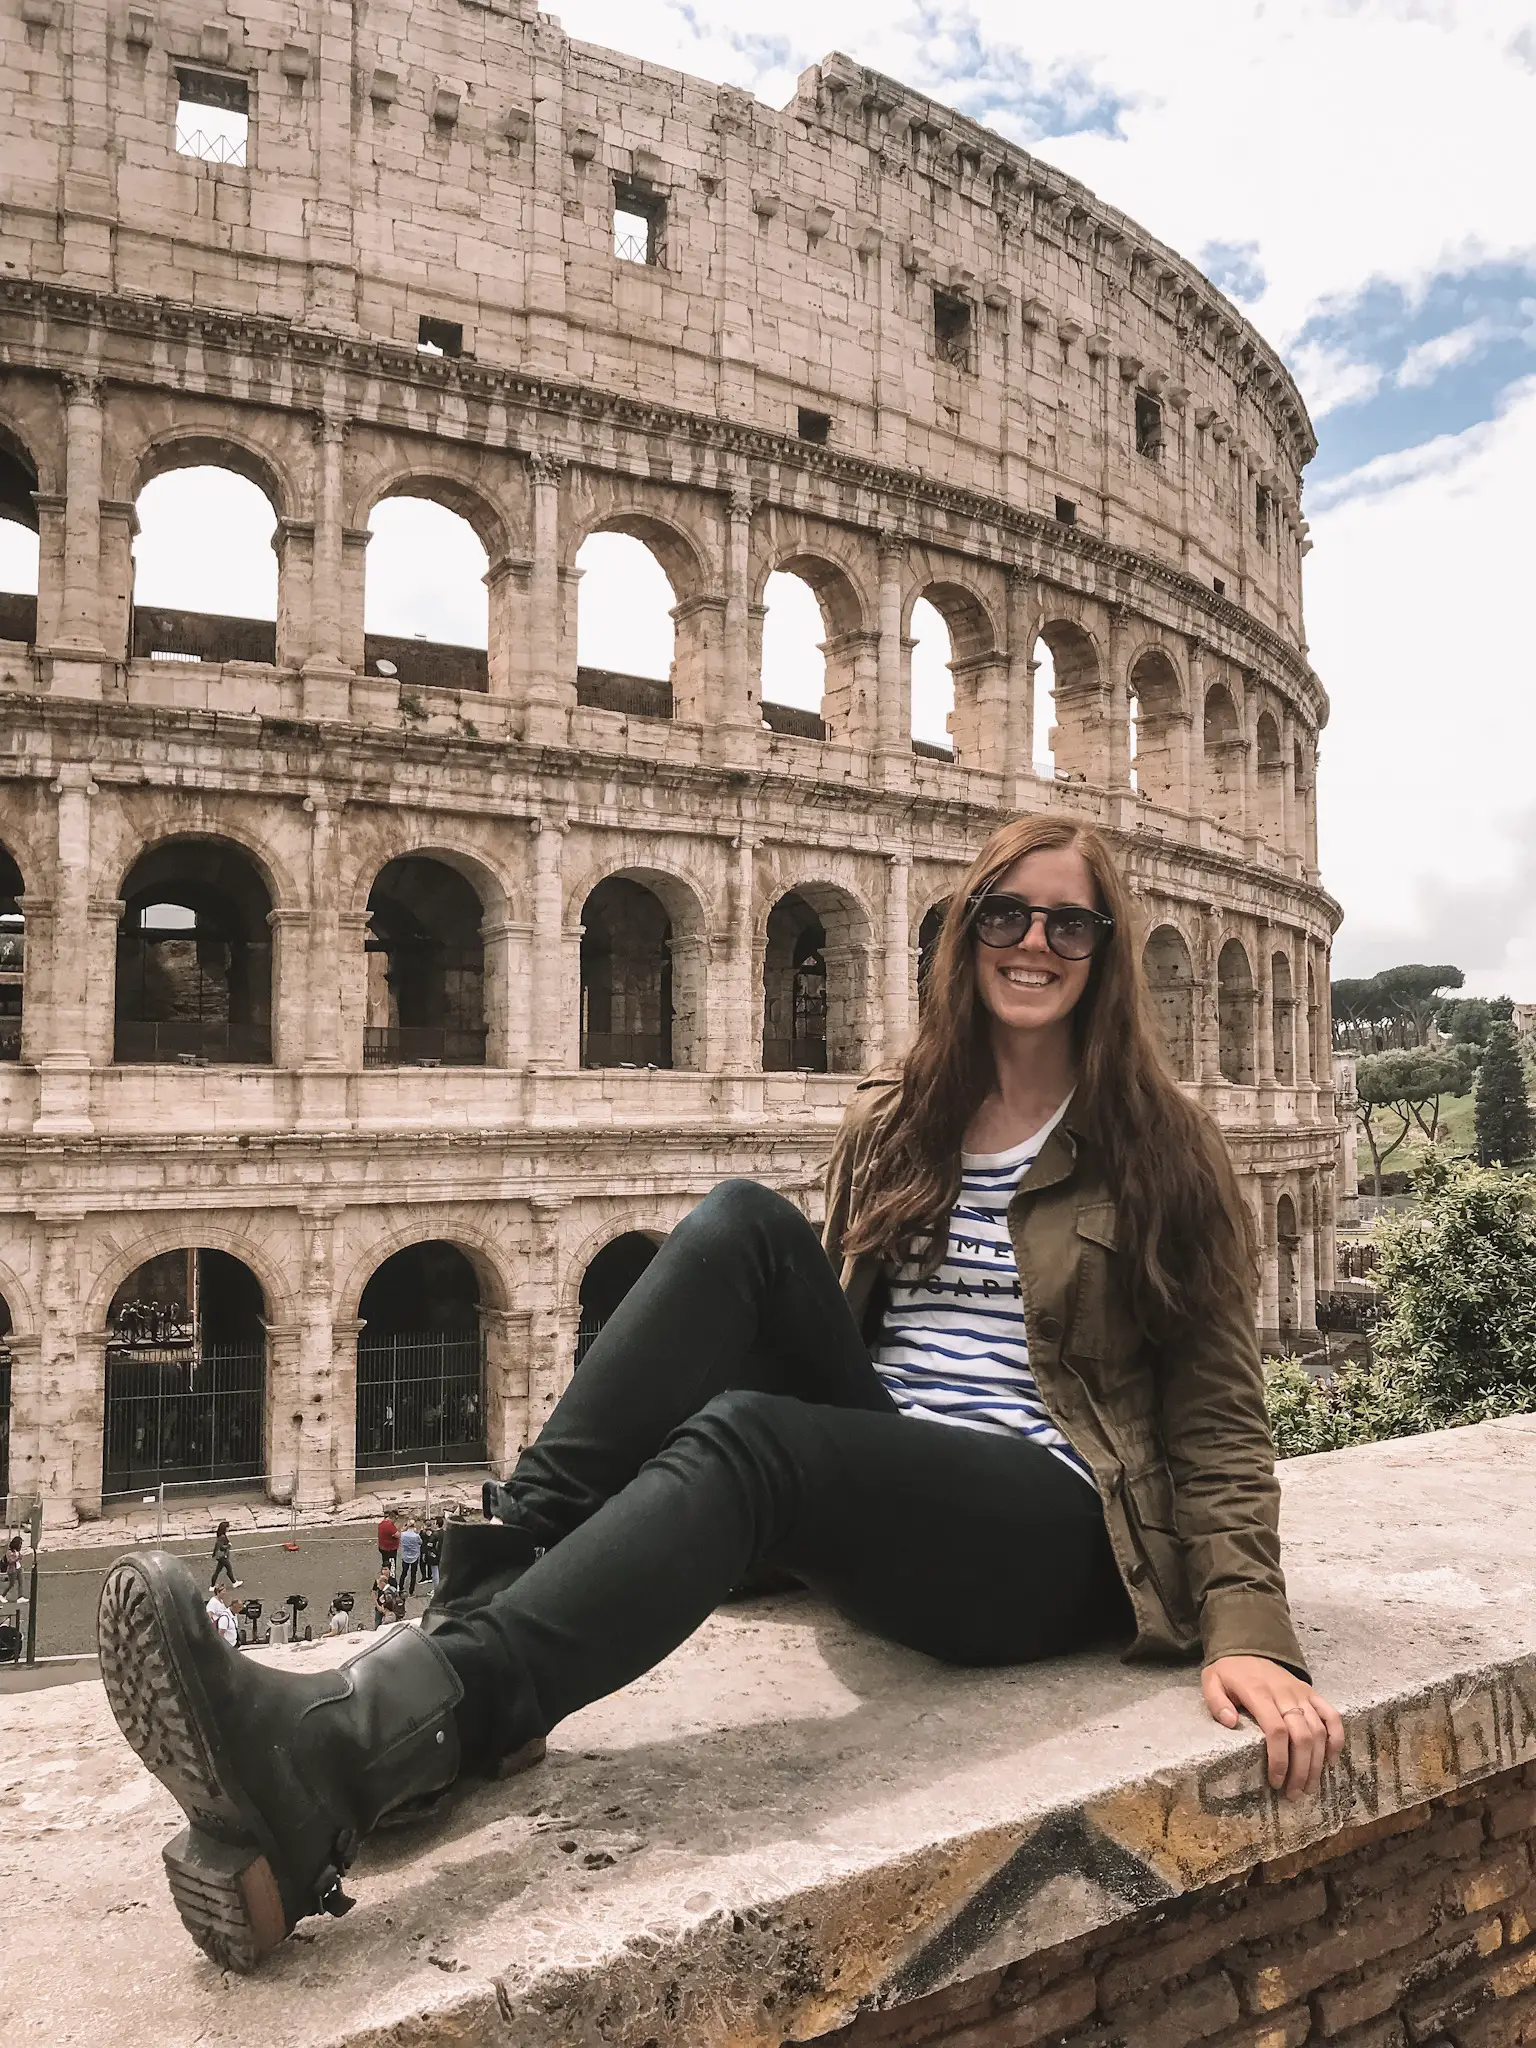 Girl in front of Colosseum in Rome Italy